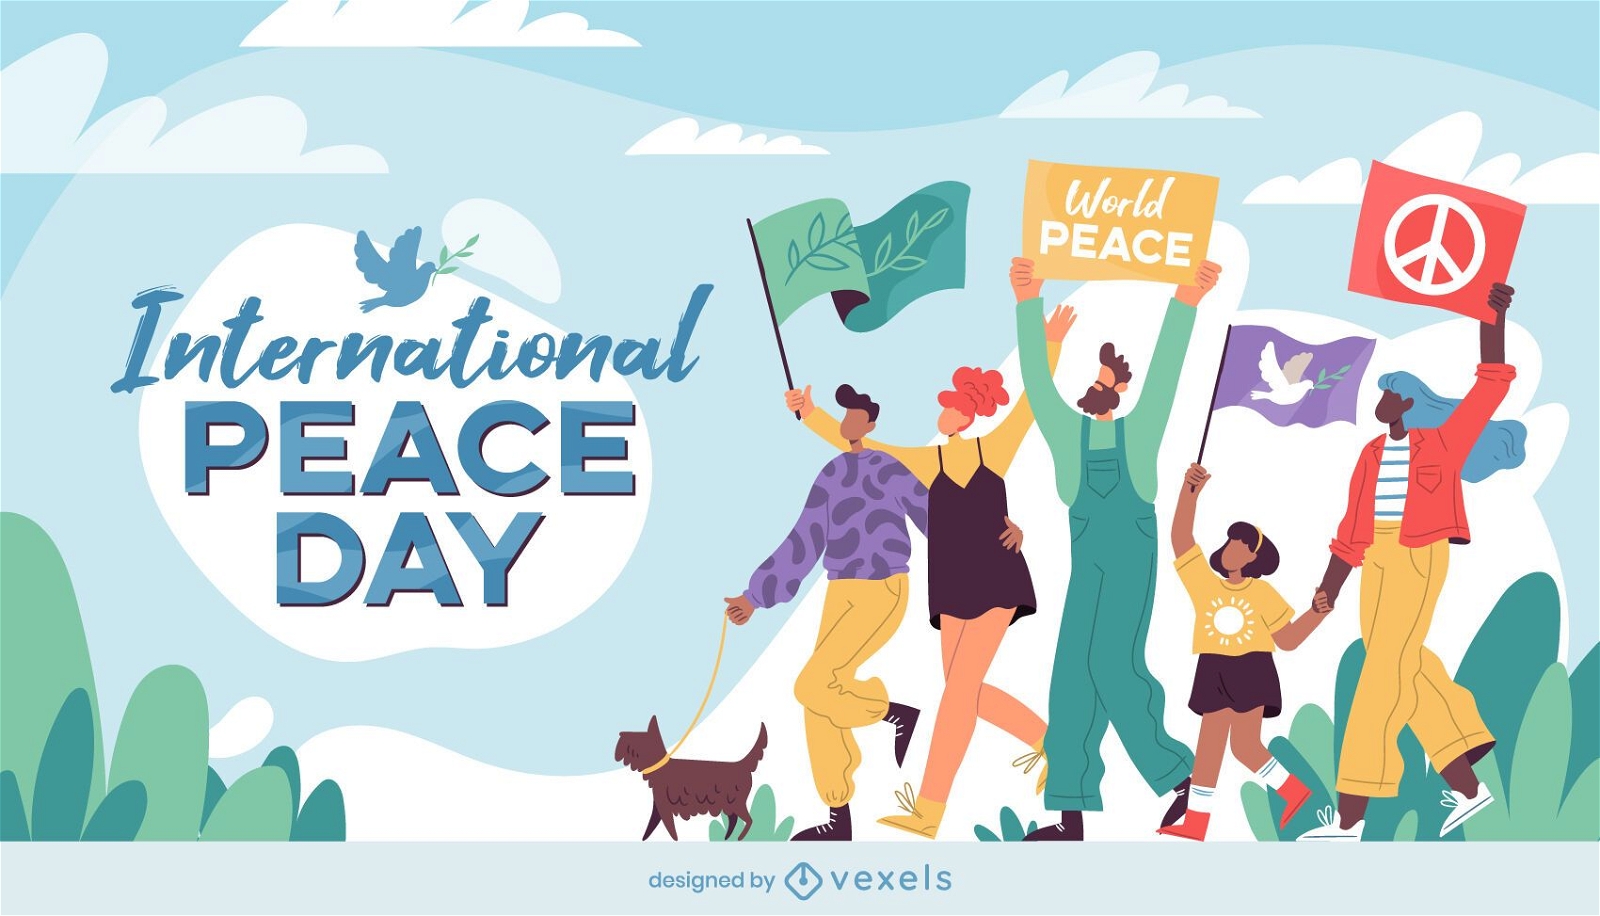 International peace day march illustration